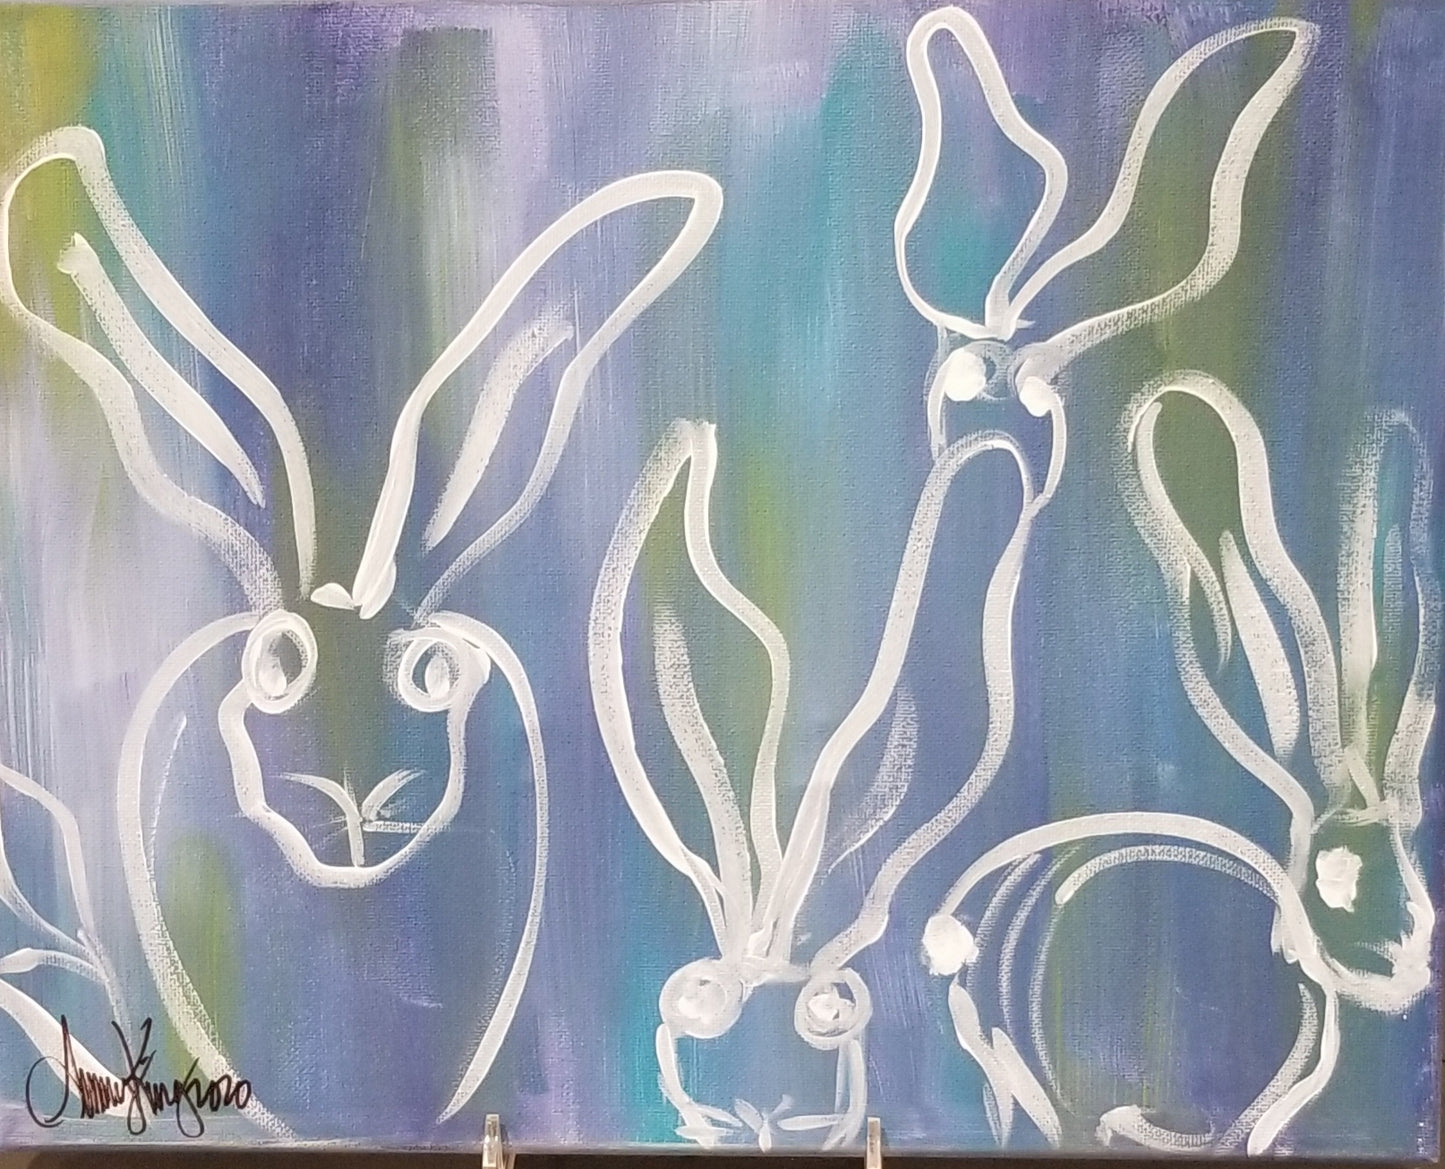 BUNNY ON CANVAS - 2 COLORS